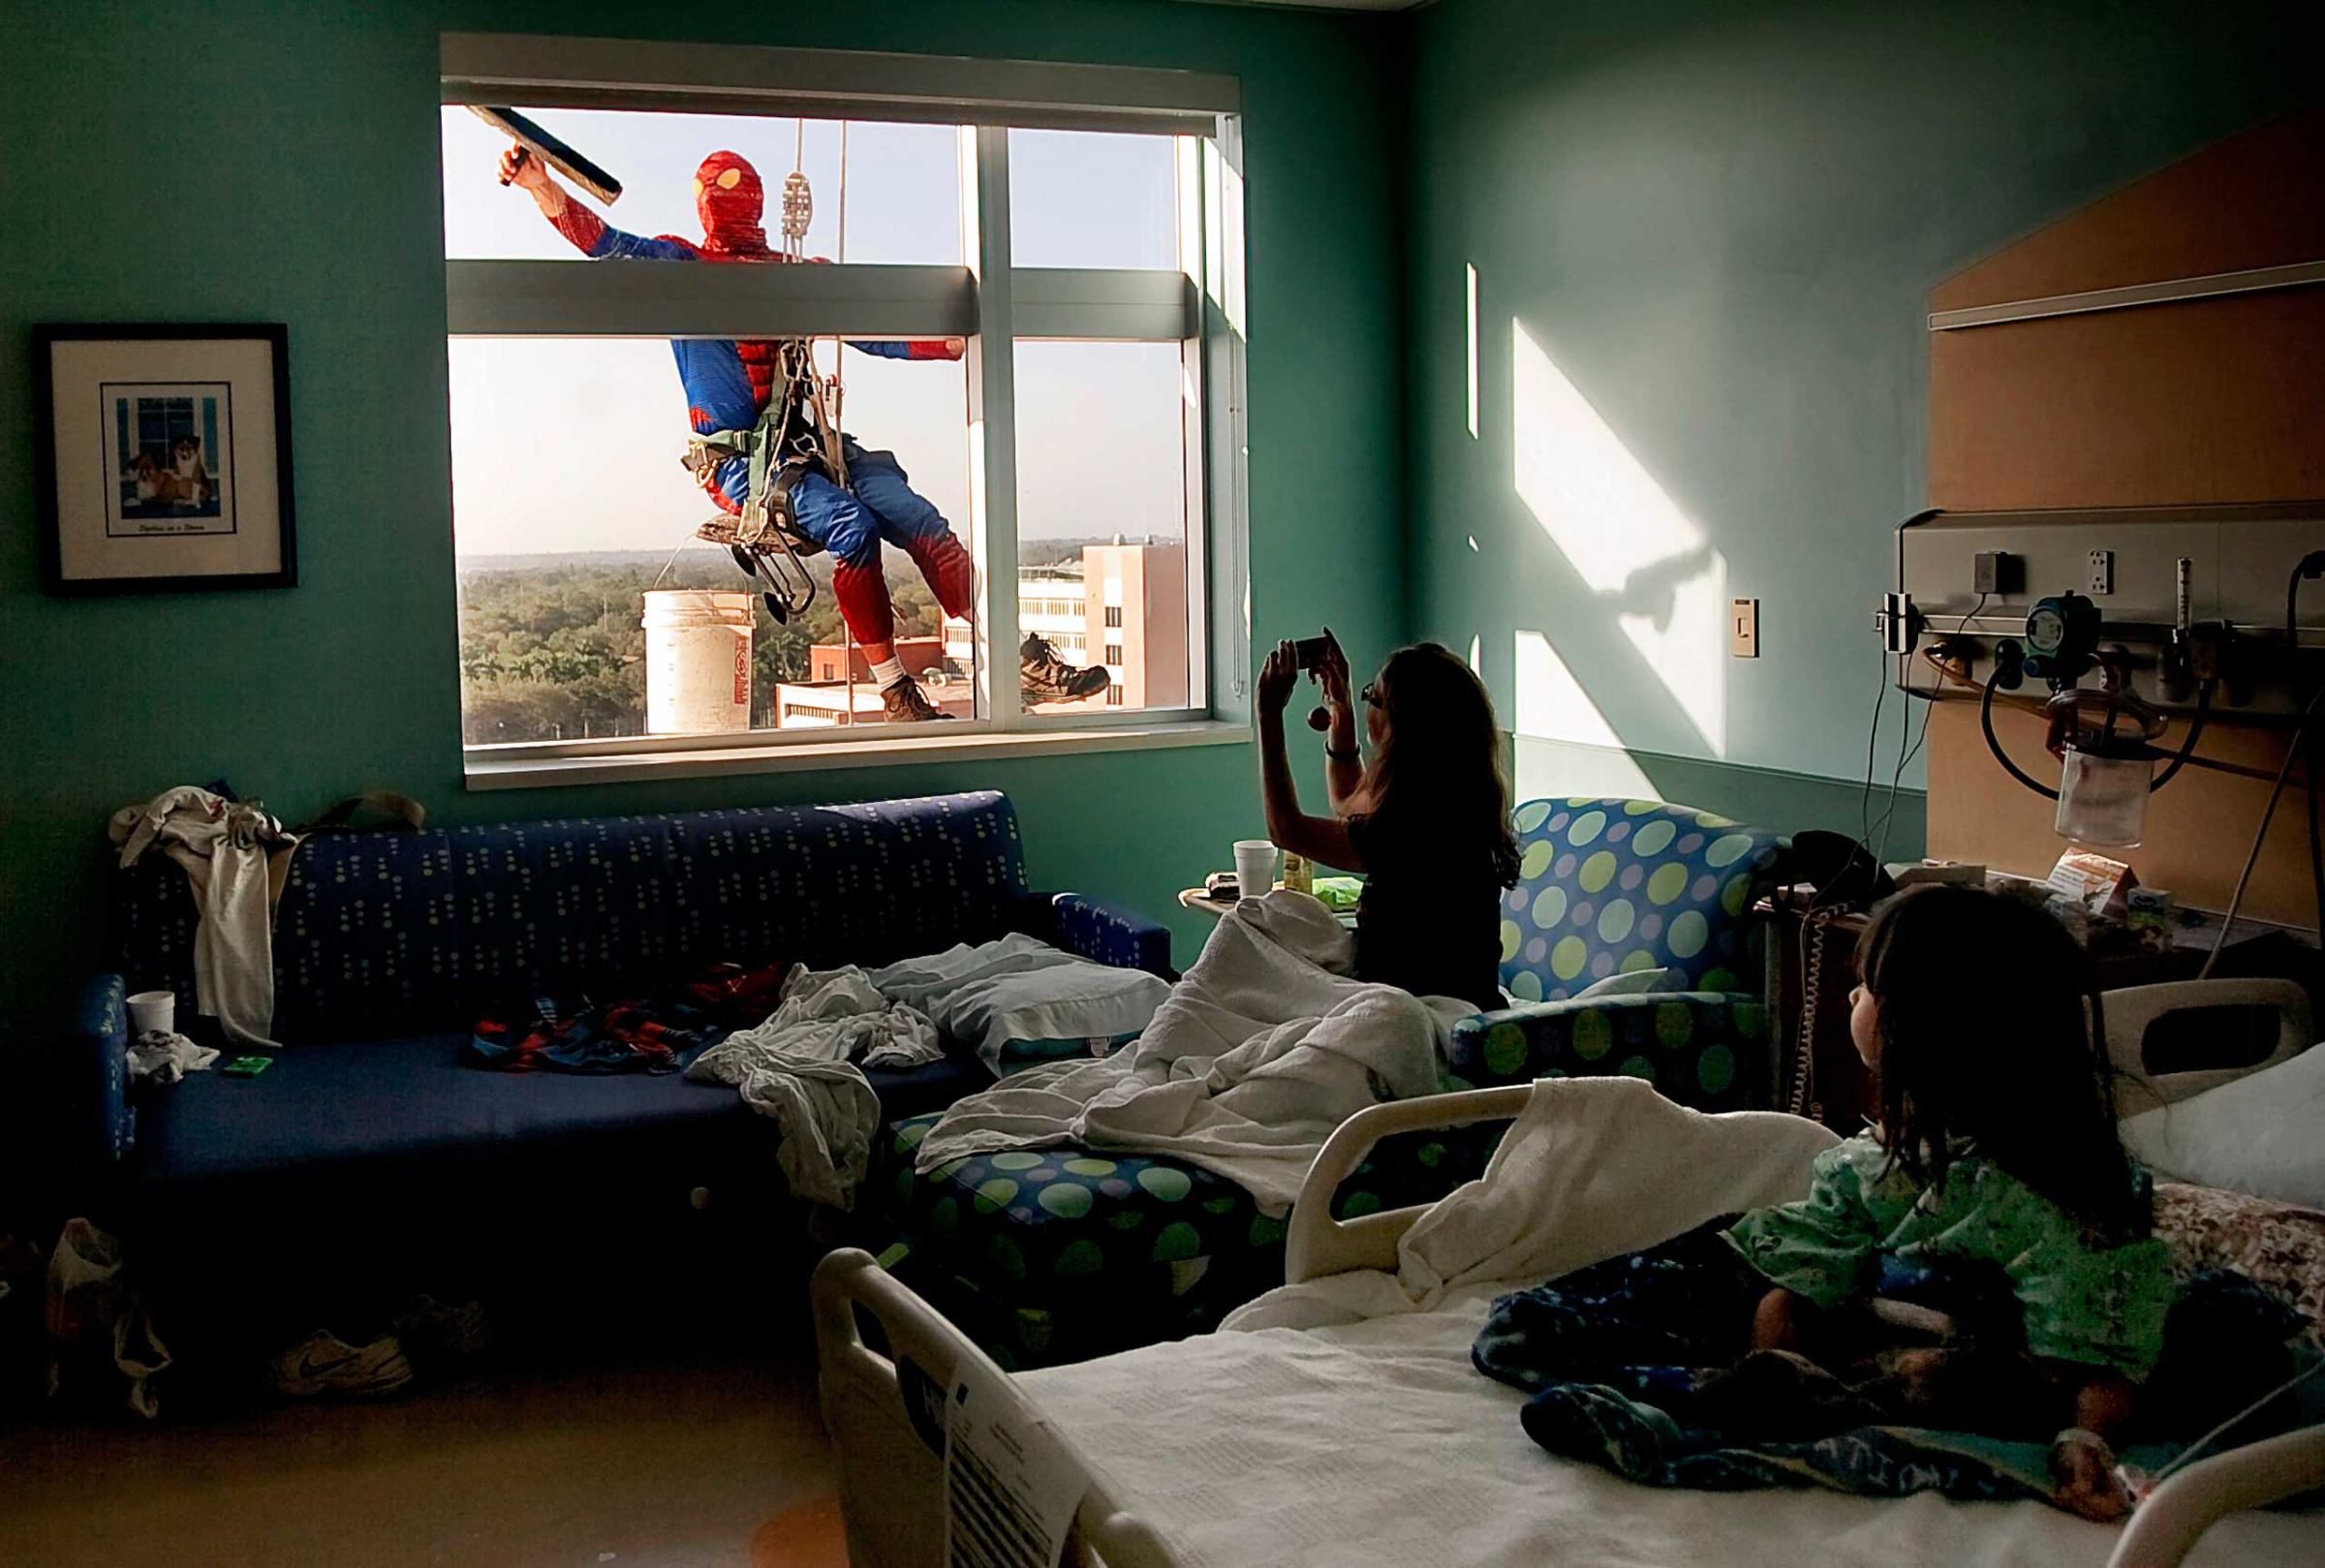 Spiderman Cleans the Windows